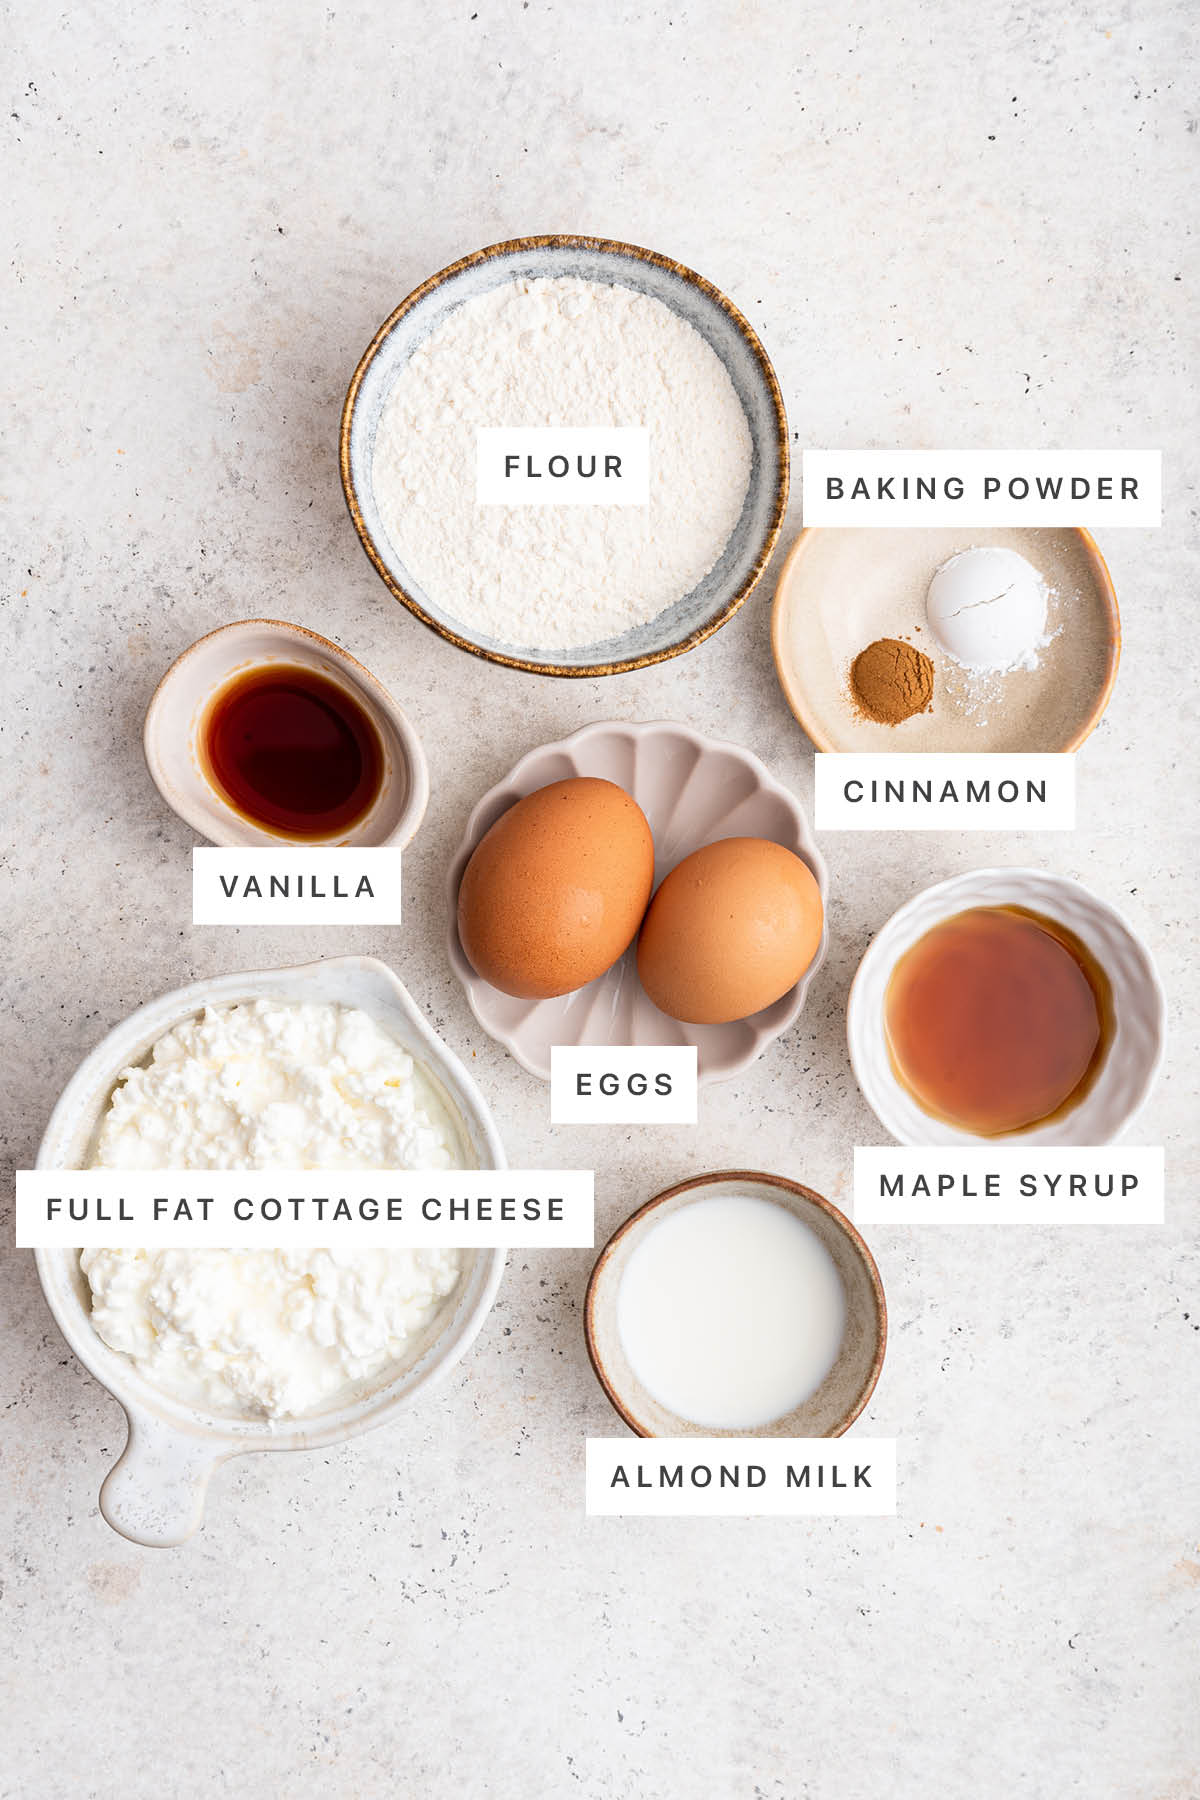 Ingredients measured out to make Cottage Cheese Pancakes: flour, baking powder, cinnamon, vanilla, eggs, maple syrup, cottage cheese and almond milk.